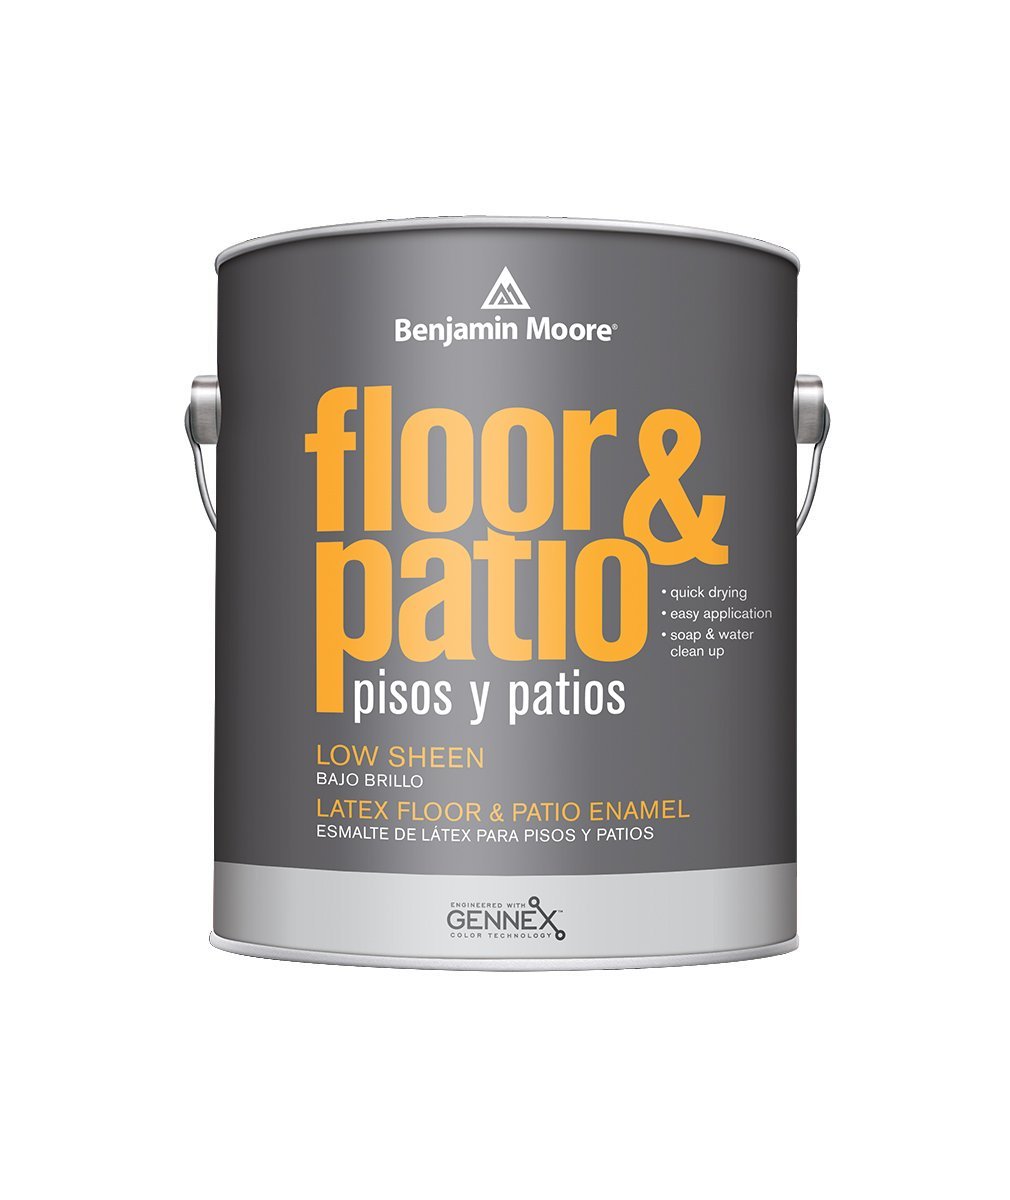 Benjamin Moore floor and patio low sheen Interior Paint available at Aboff's.